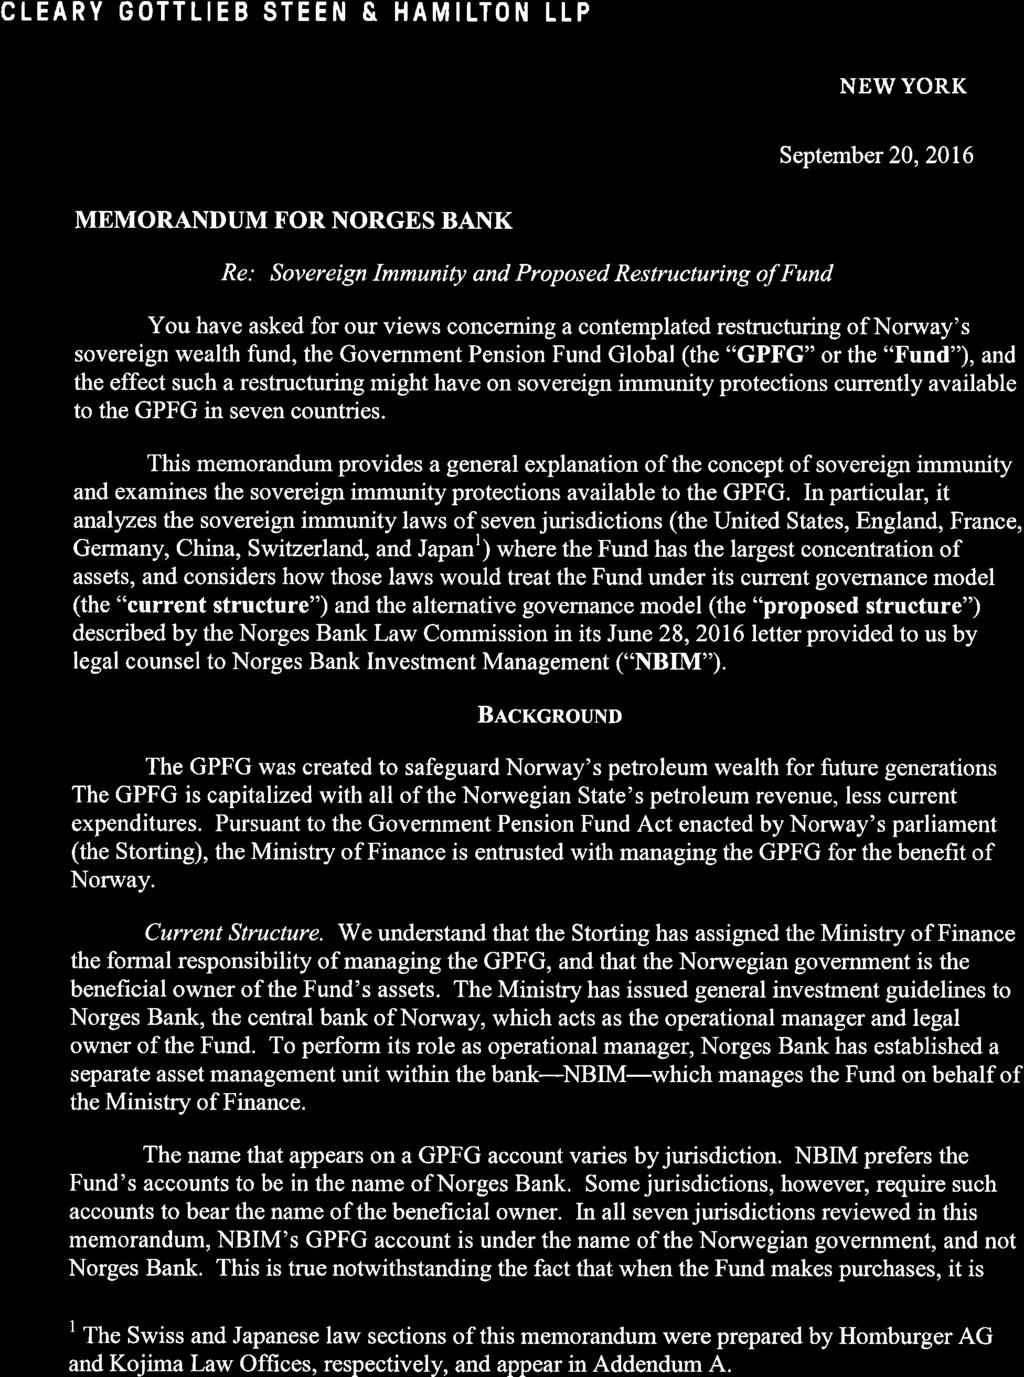 CLEARY GOTTLIEB STEEN & HAMILTON LLP NEW YORK September 20, 2016 MEMORANDUM FOR NORGES BANK Re: Sovereign Immunity and Proposed Restructuring of Fund You have asked for our views concerning a